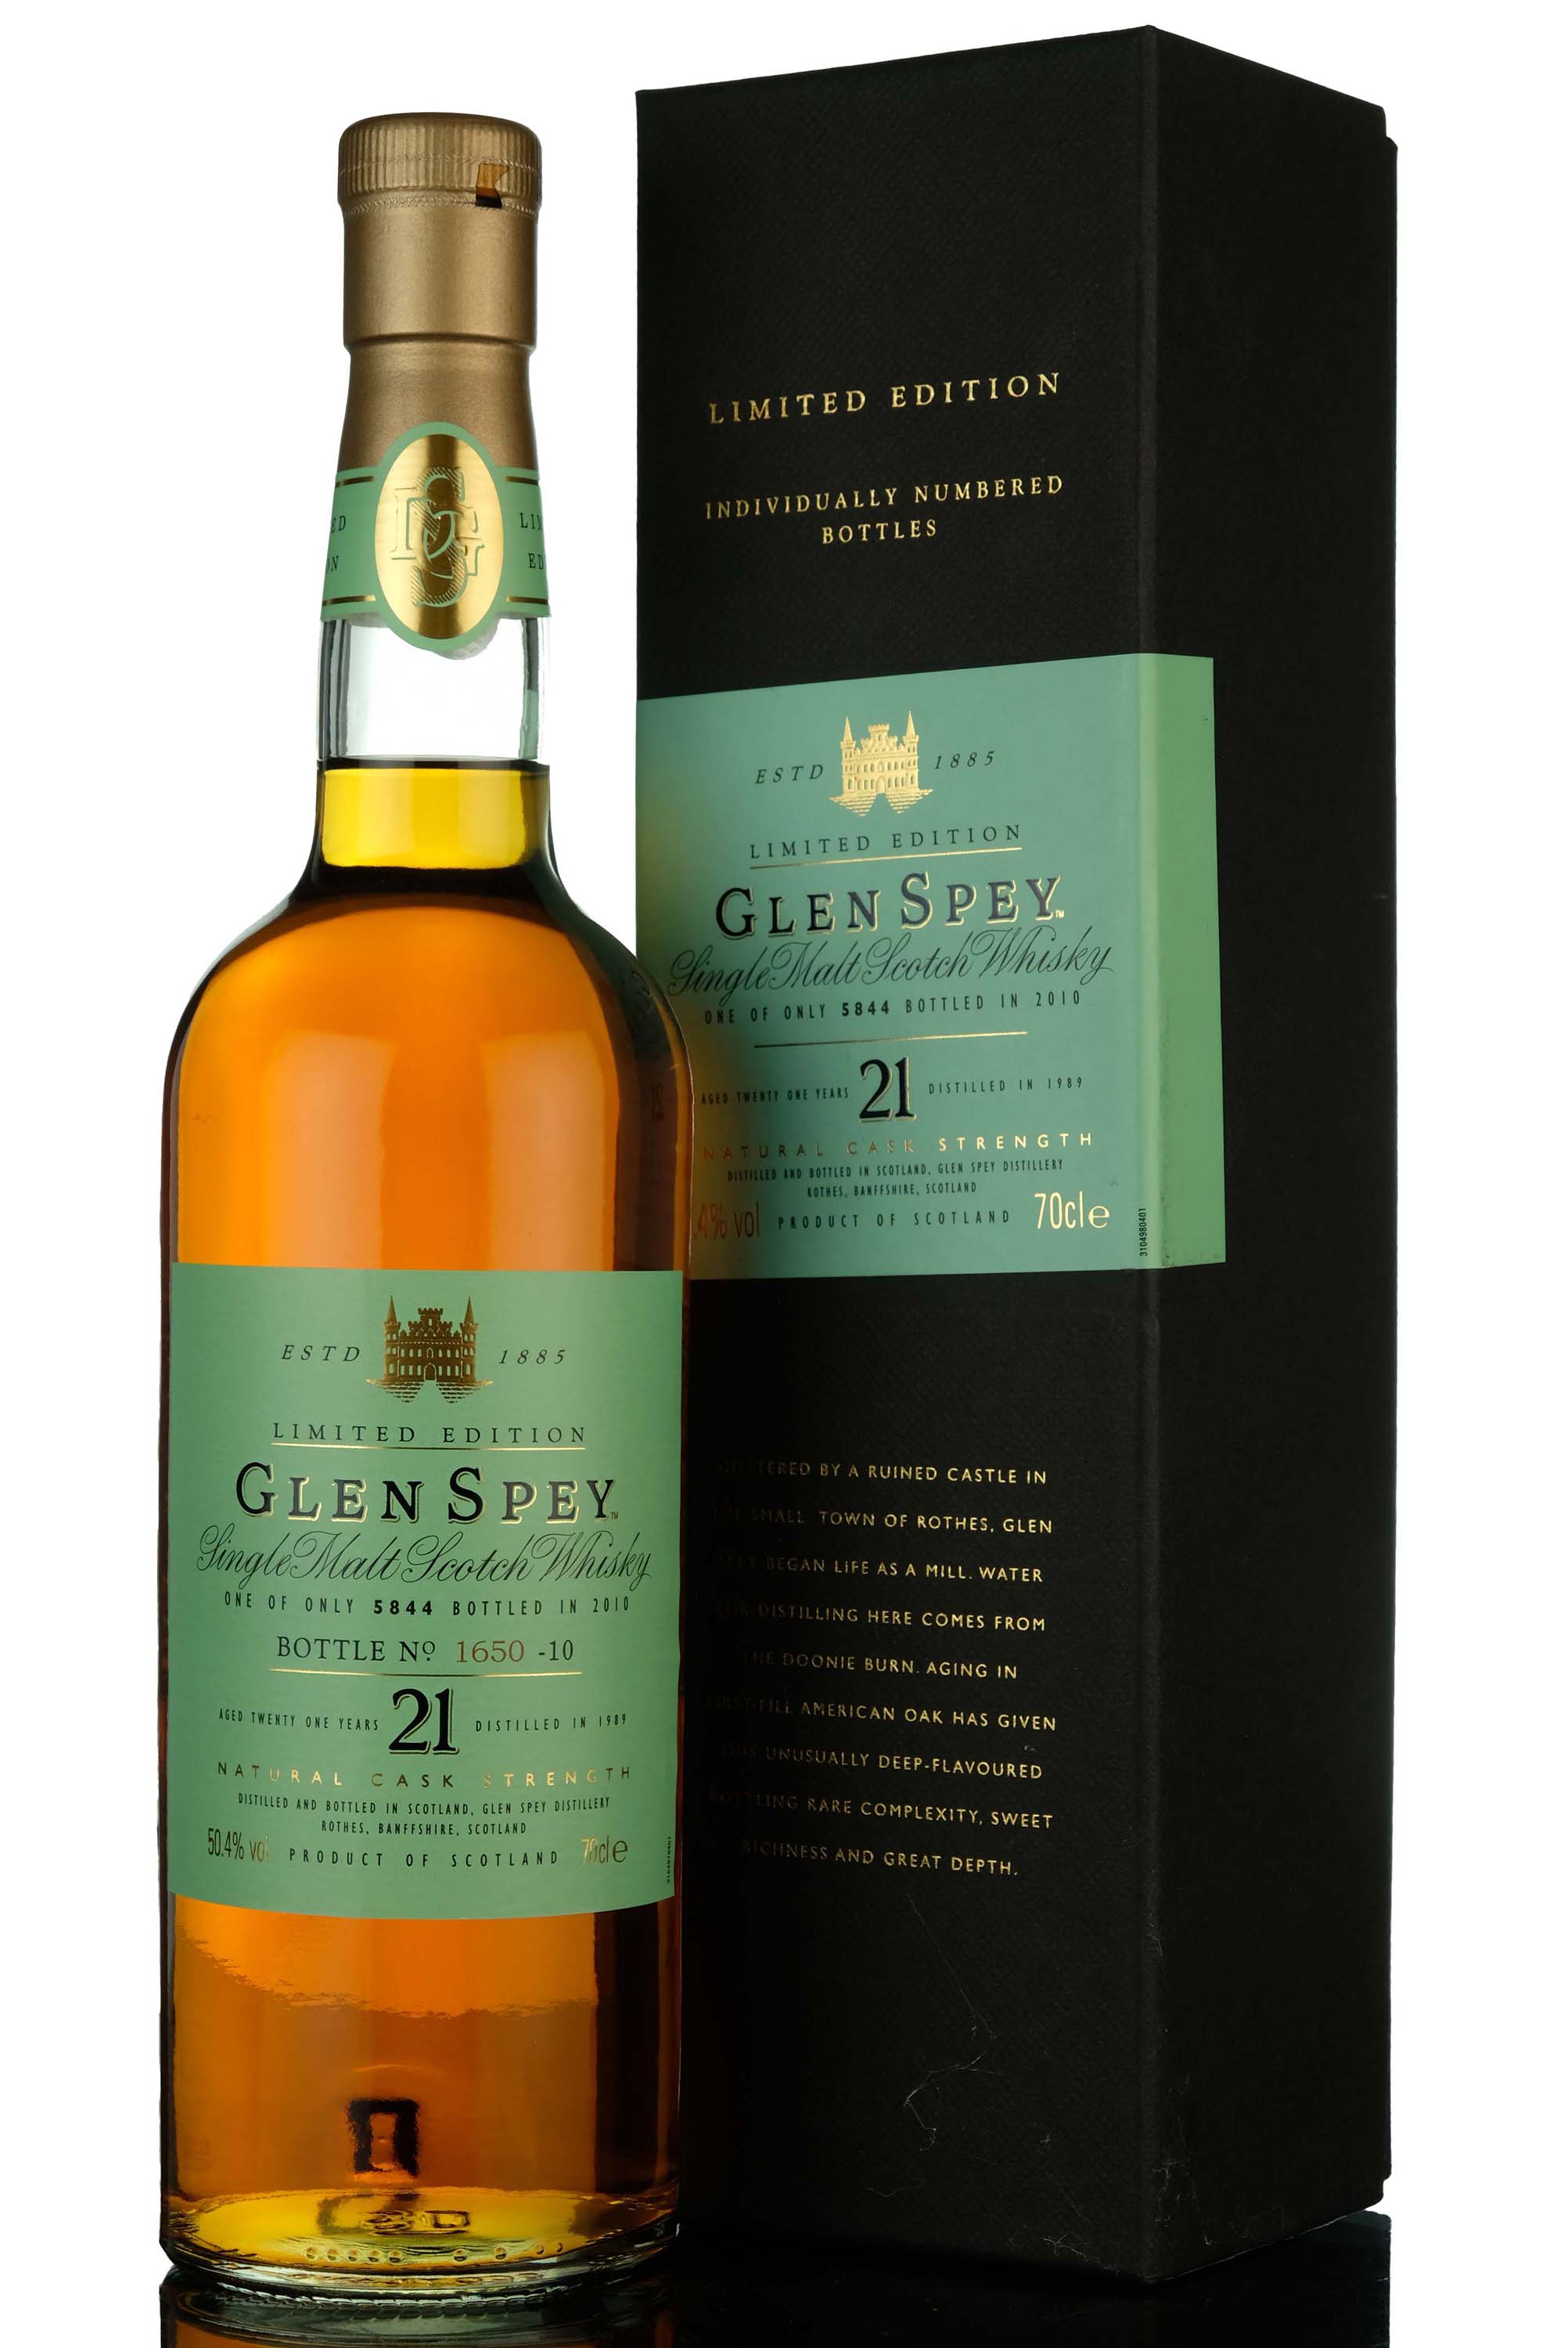 Glen Spey 1989 - 21 Year Old - Special Releases 2010